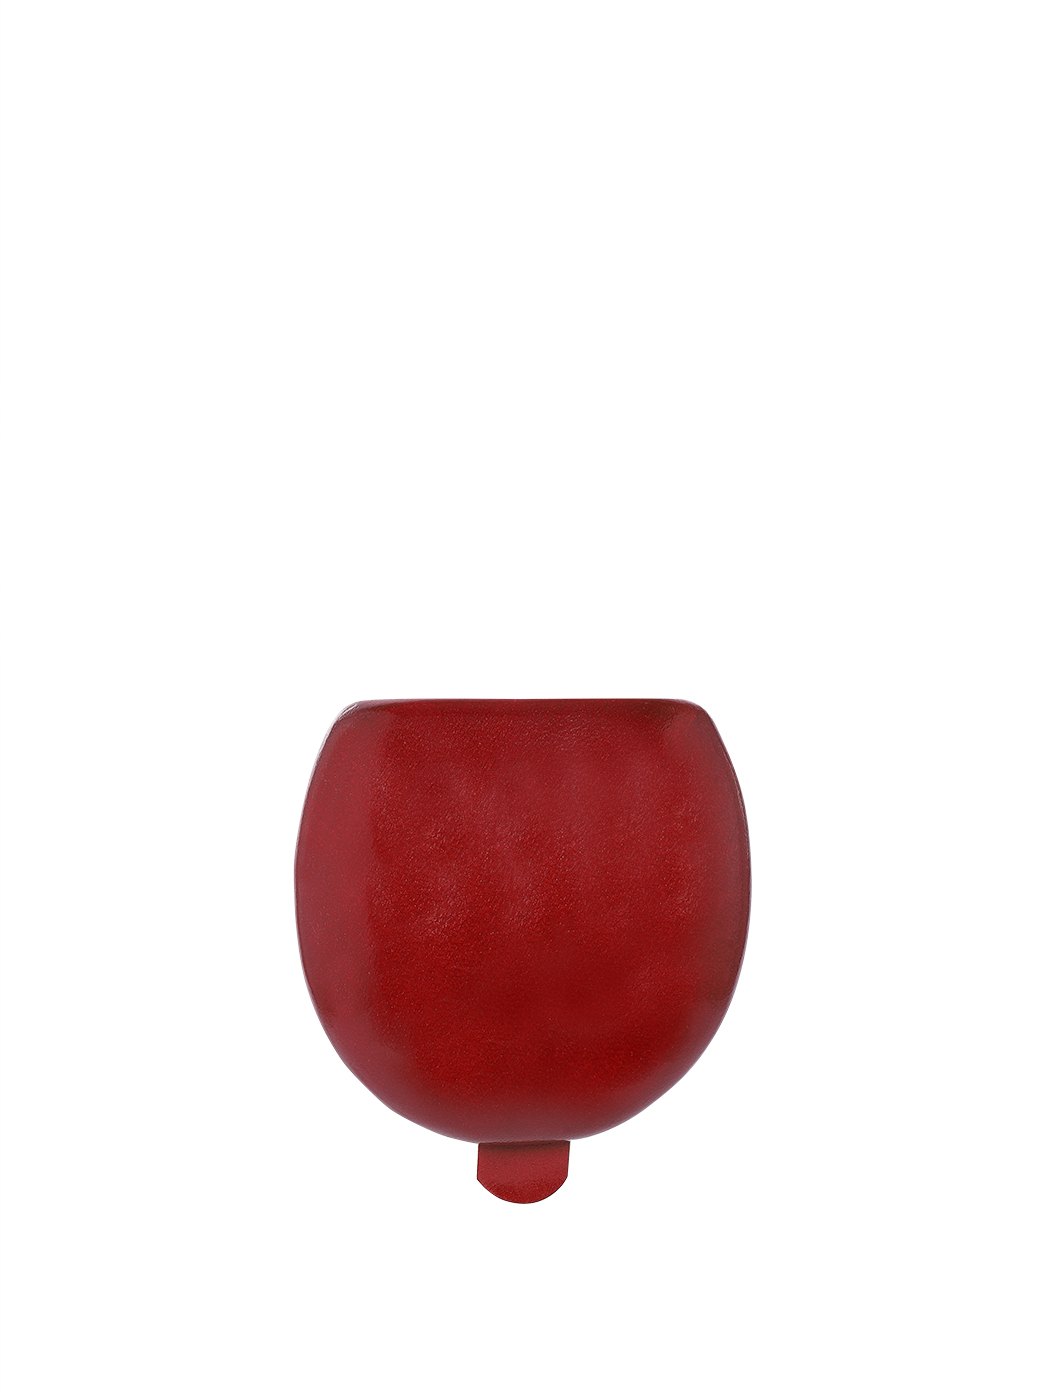 Florentine Tacco Leather Coin Holder Red